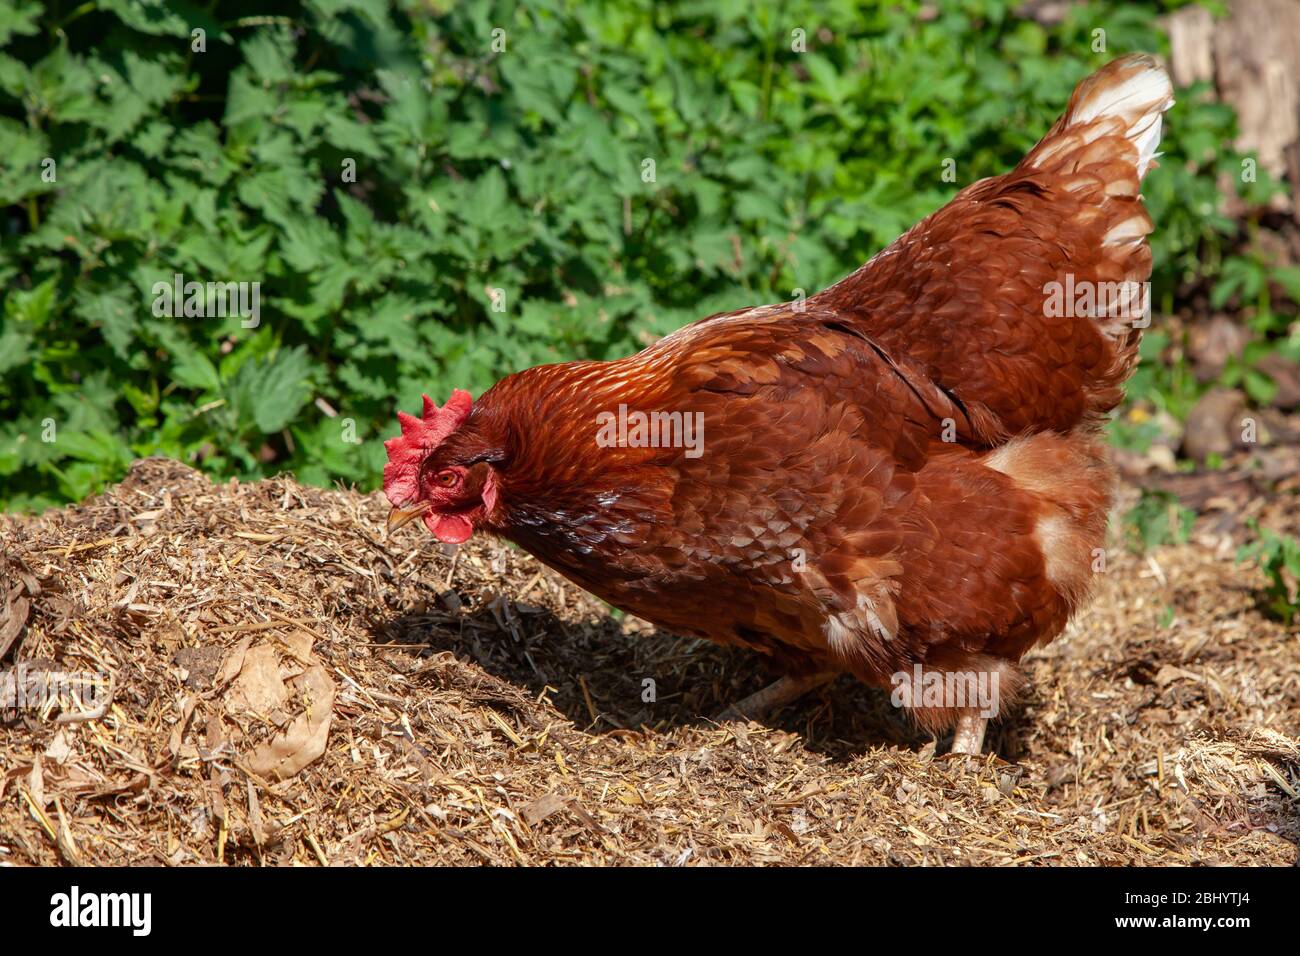 Free Range hen searching for food in back garden. British Isles. Stock Photo